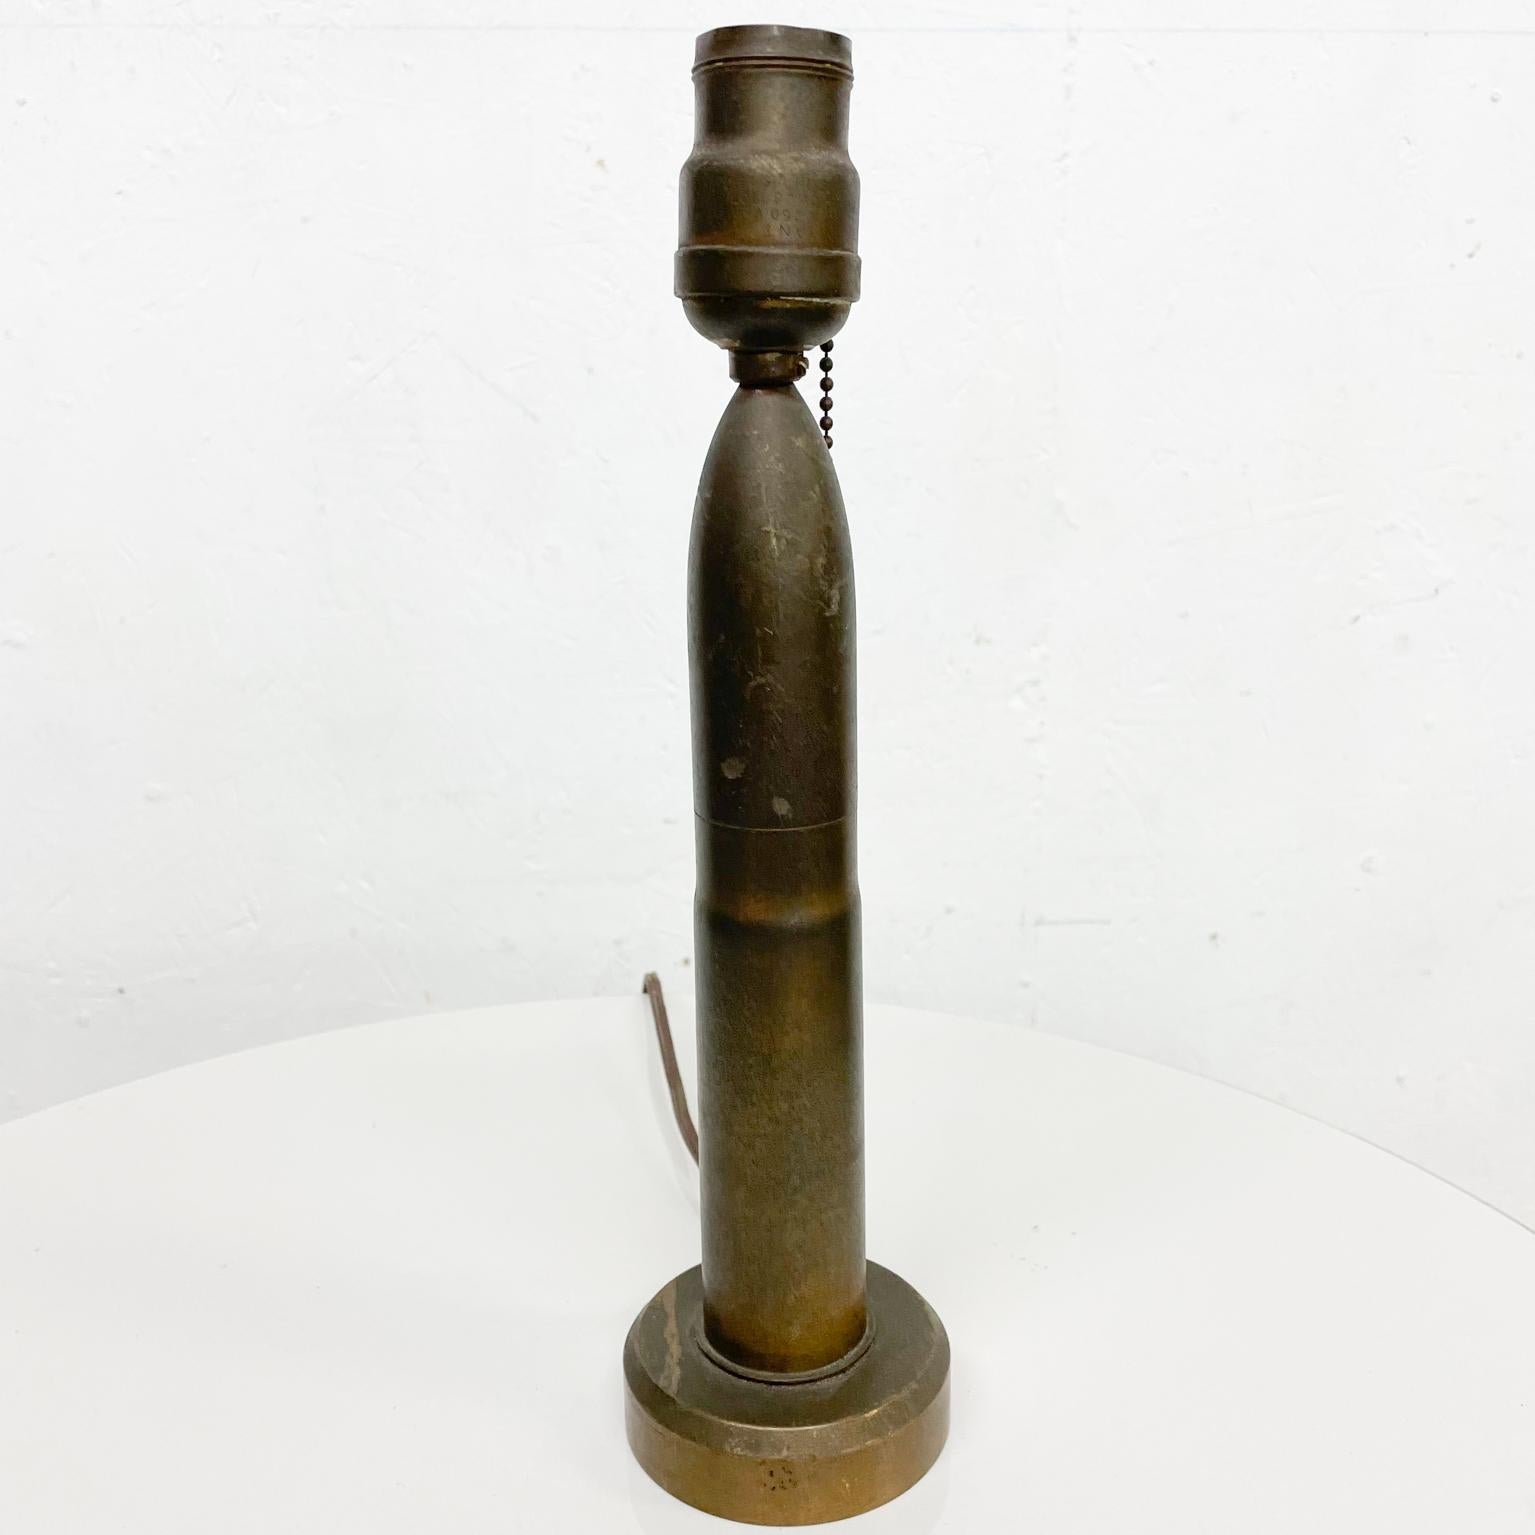 Lamp
Vintage single table lamp military artillery bullet shell, designed in patinated bronze
Patina present.
No shade.
Original vintage patina, untested, in unrestored vintage condition.
Measures: 12.63 height x 3.25 diameter at widest
See